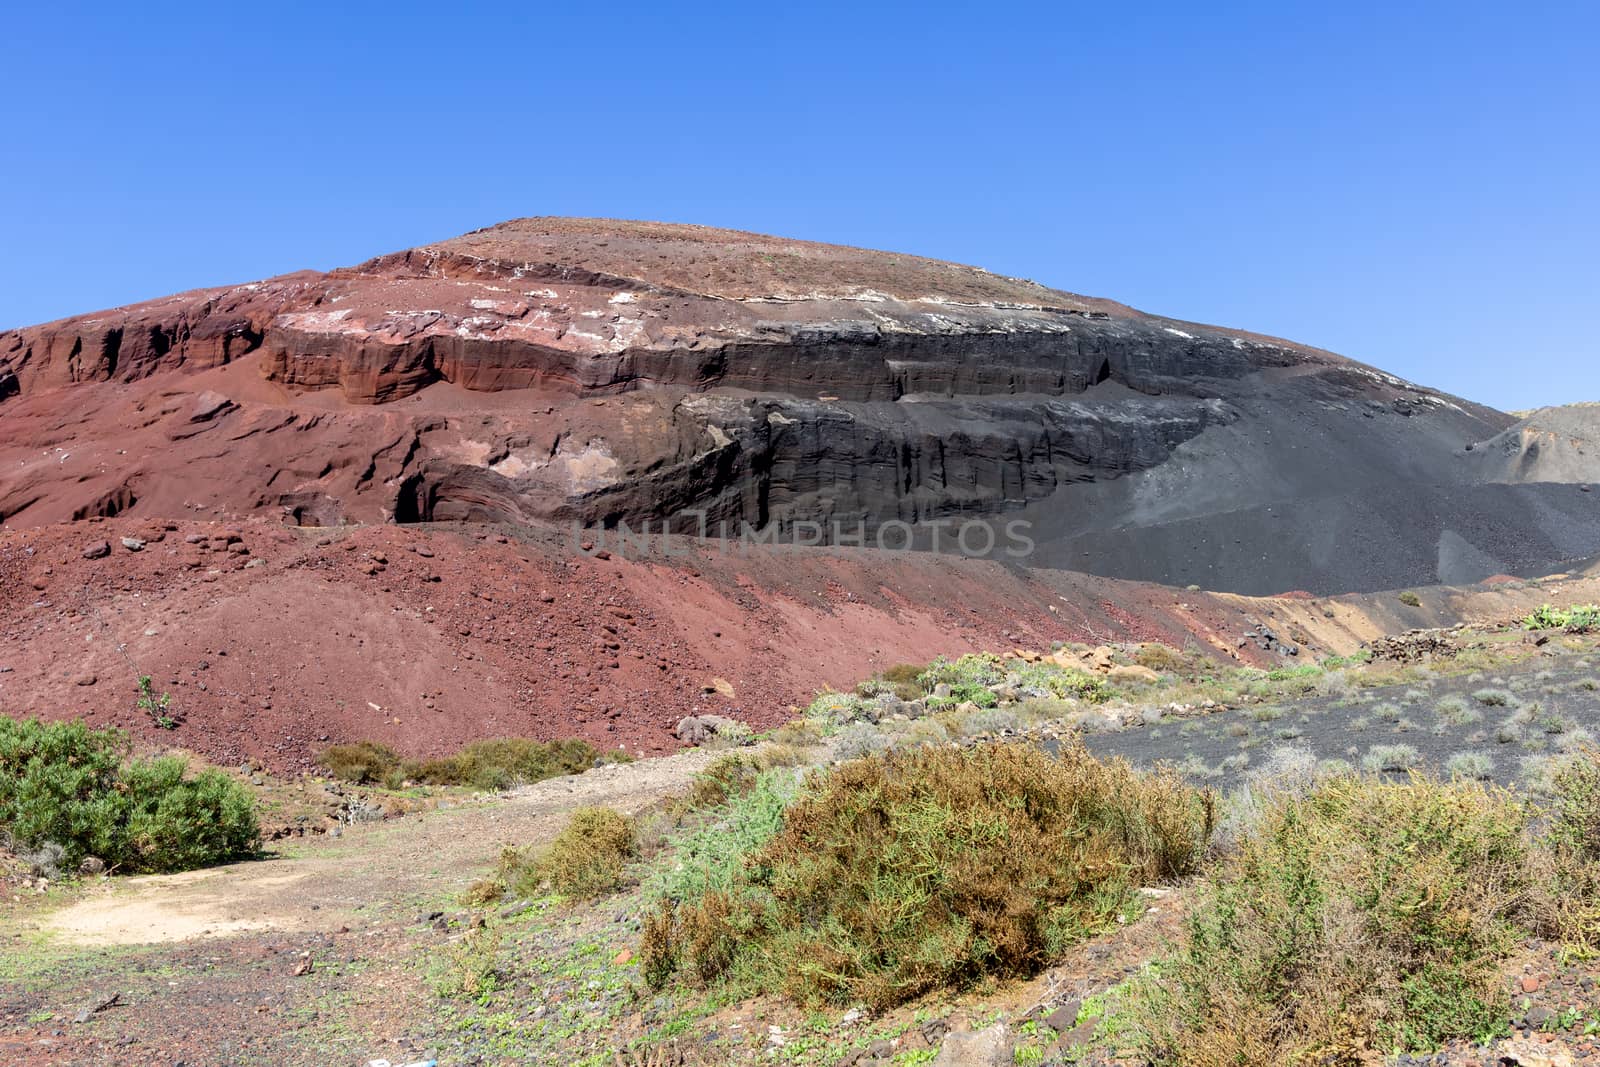 Panoramic view at red and black colored volcanic rock formation in the south of canary island Lanzarote, Spain nearby Playa Blanca with sparse vegetation in the foreground and blue sky